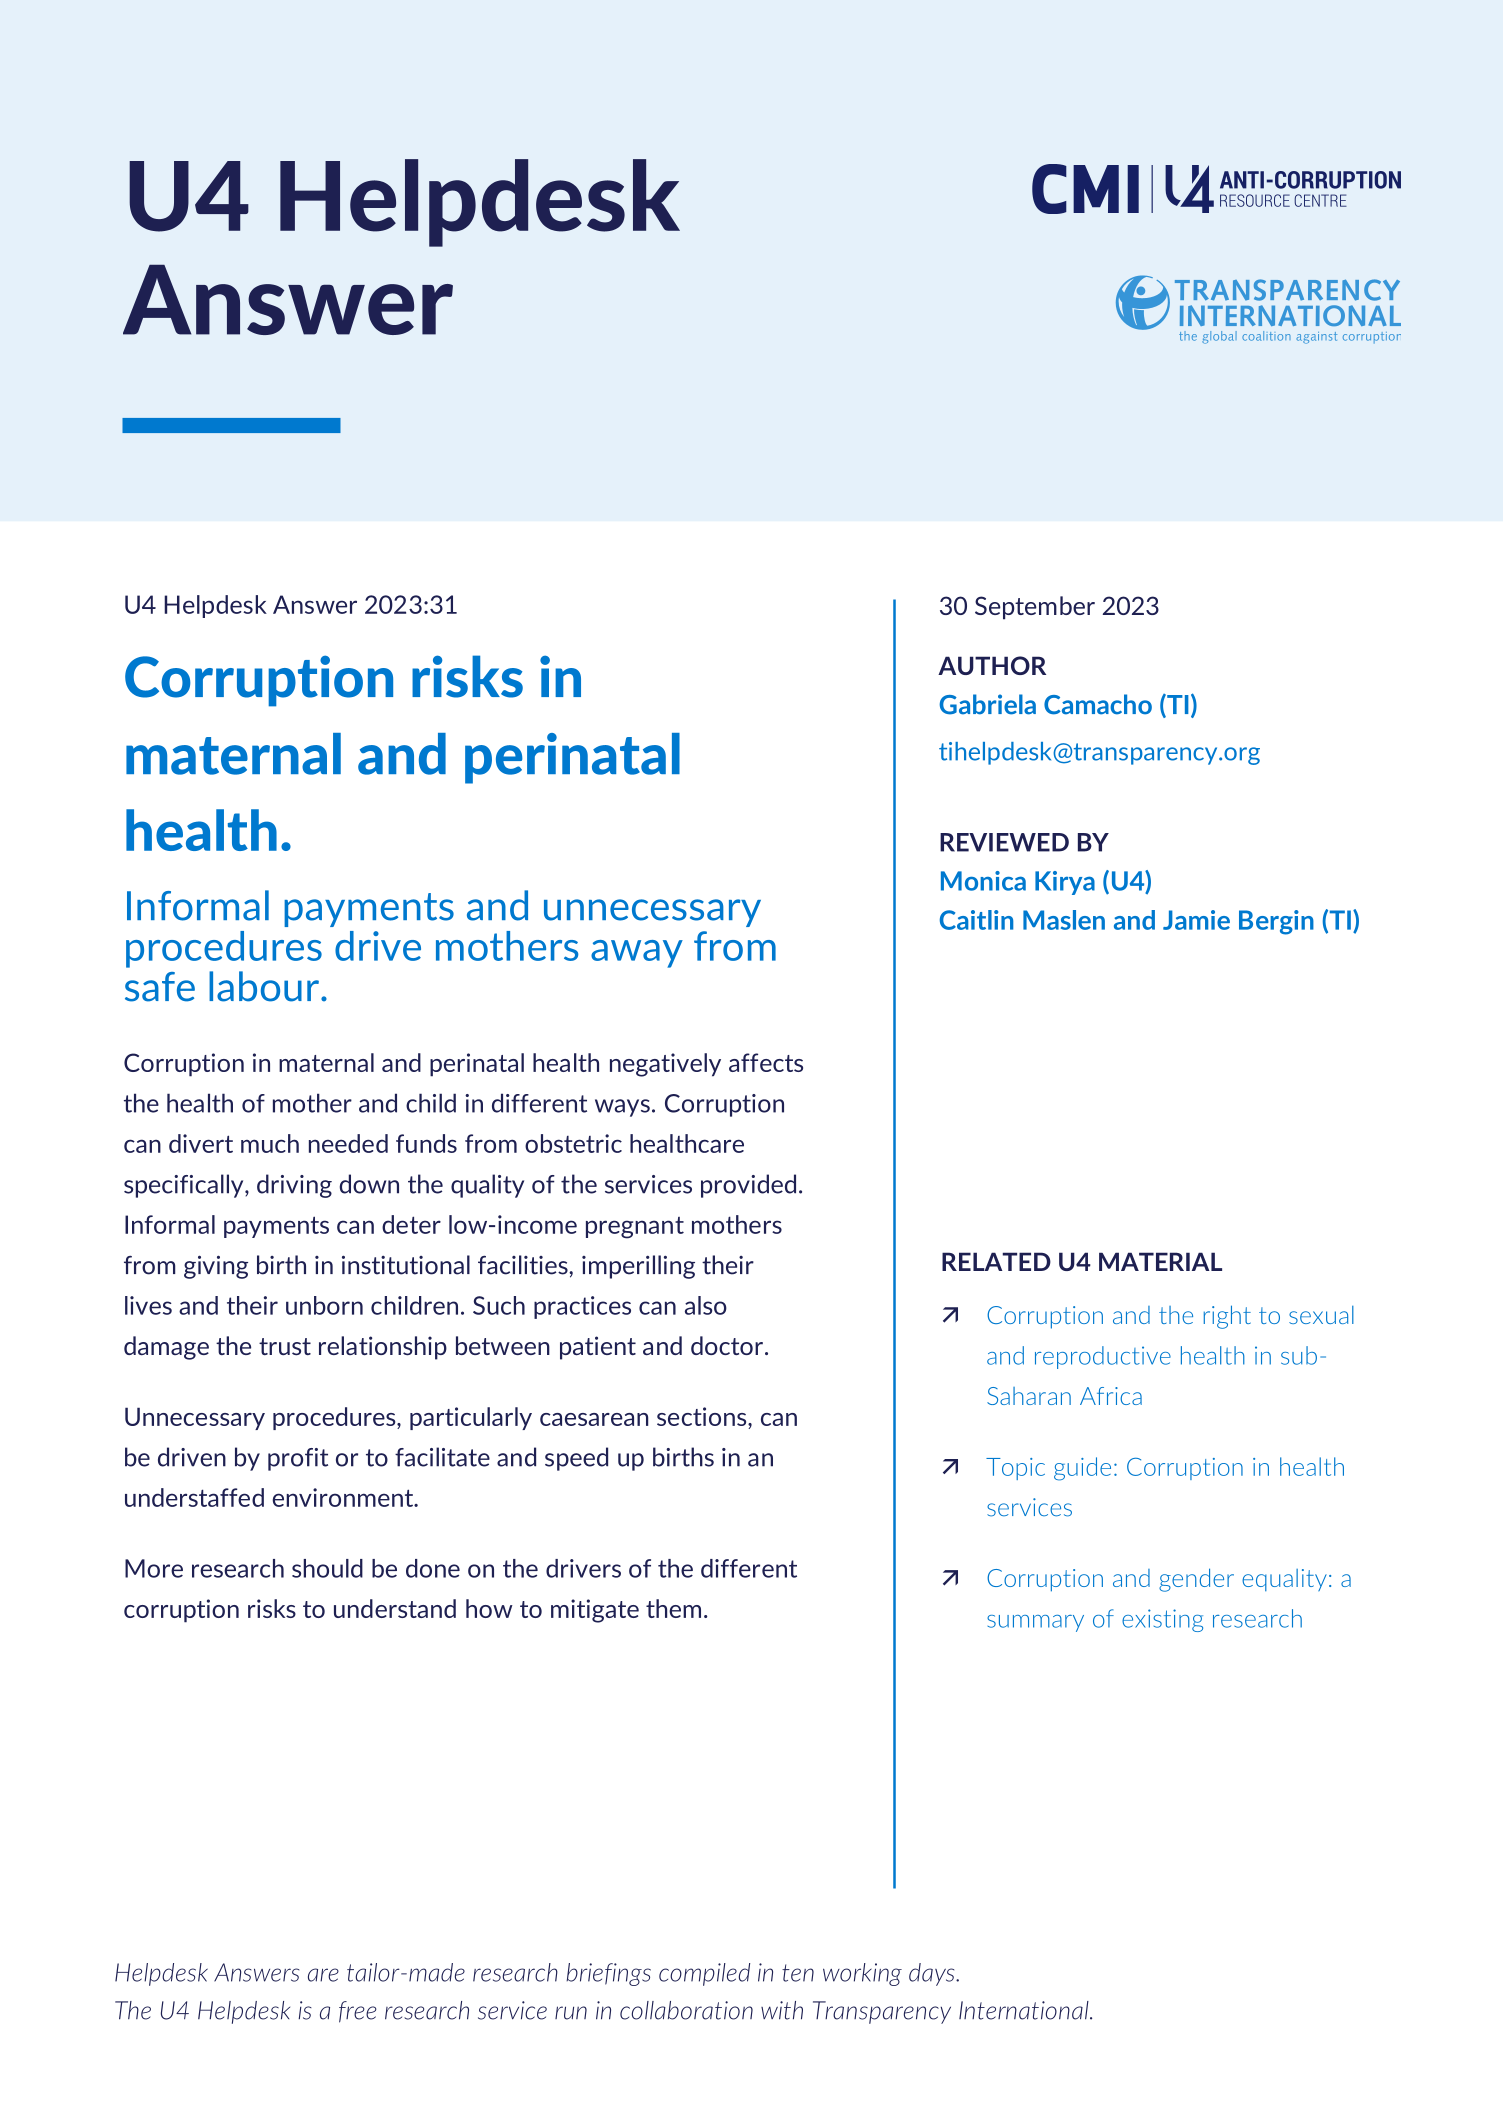 Corruption risks in maternal and perinatal health